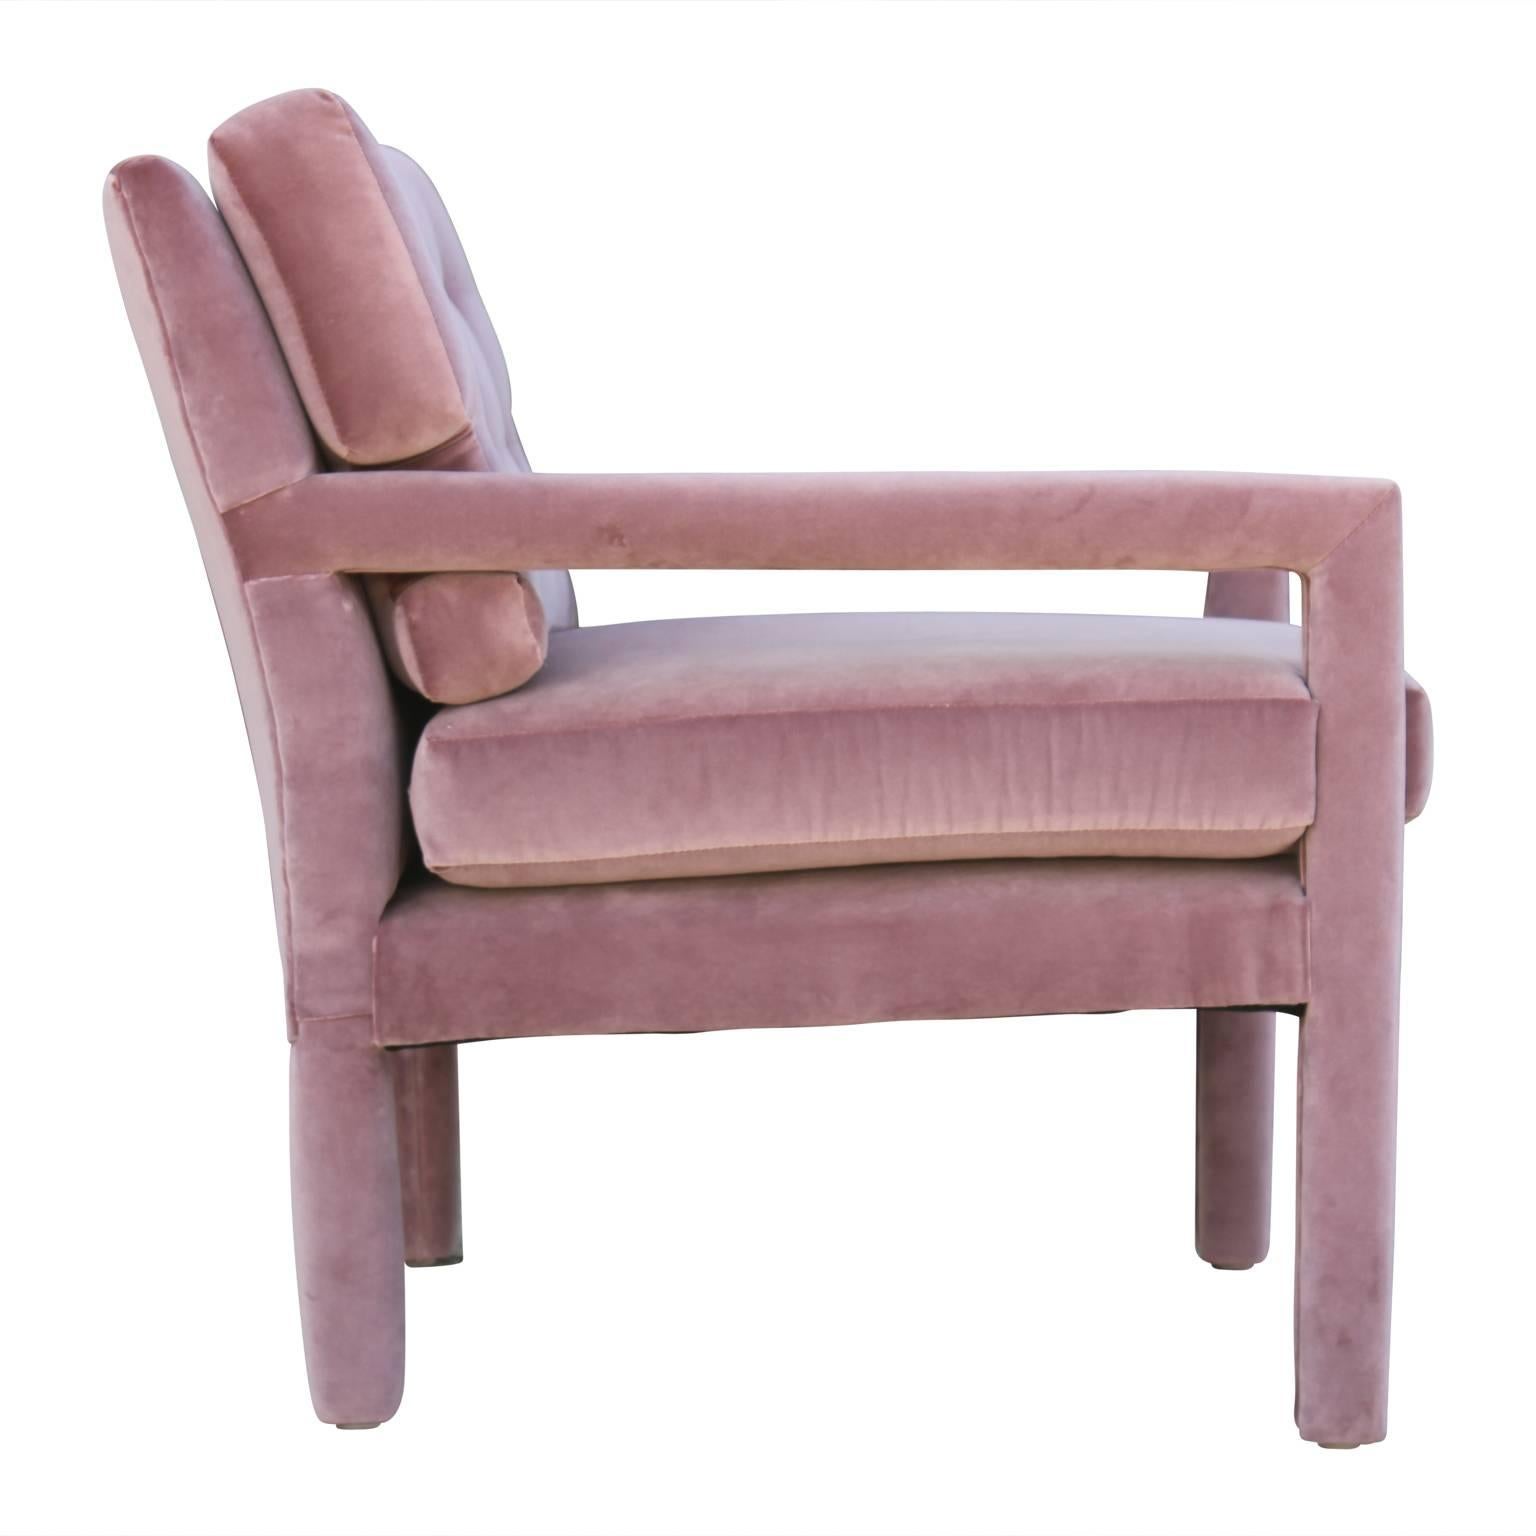 parsons style chair